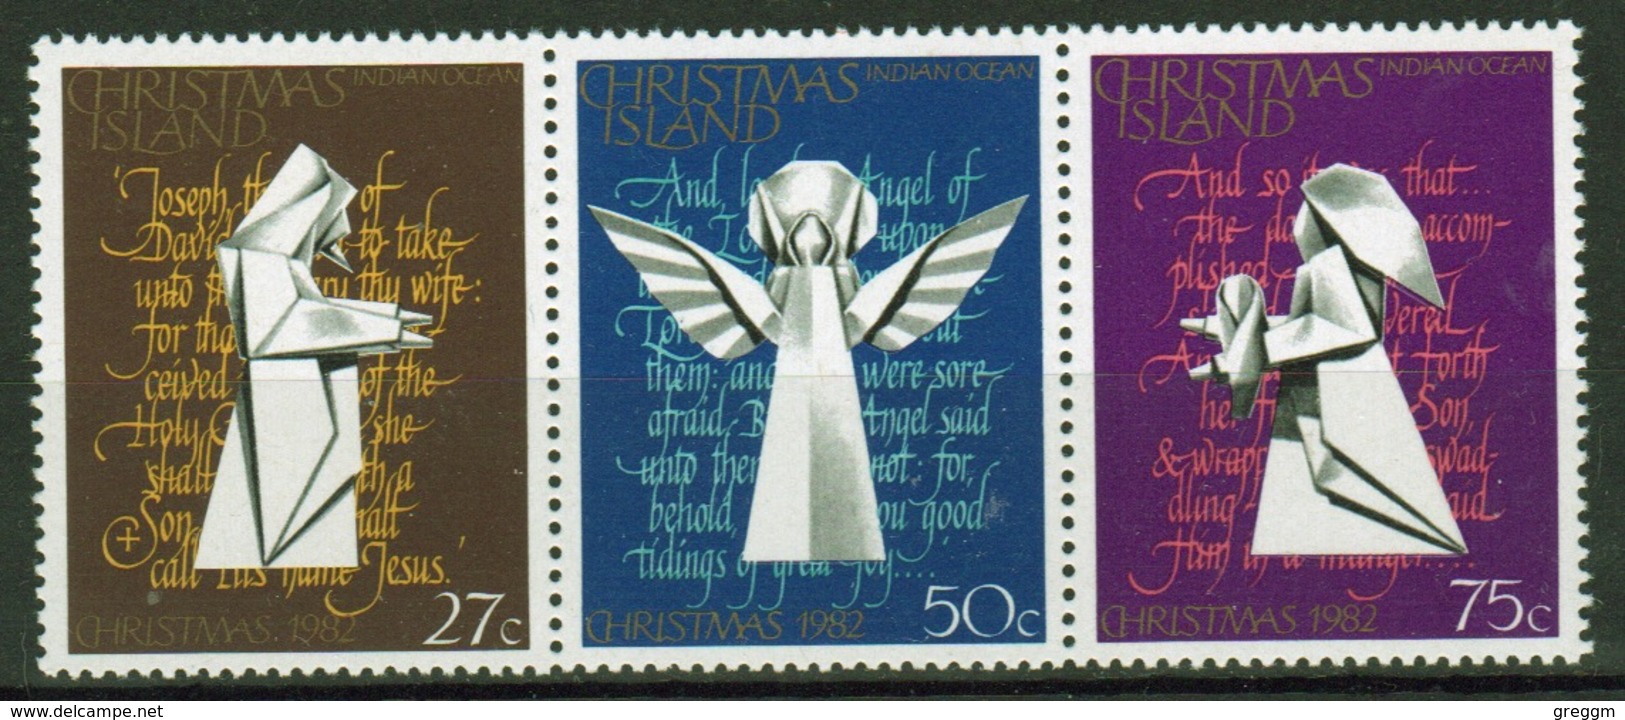 Christmas Island Set Of Stamps To Celebrate 1982 Christmas. - Christmas Island